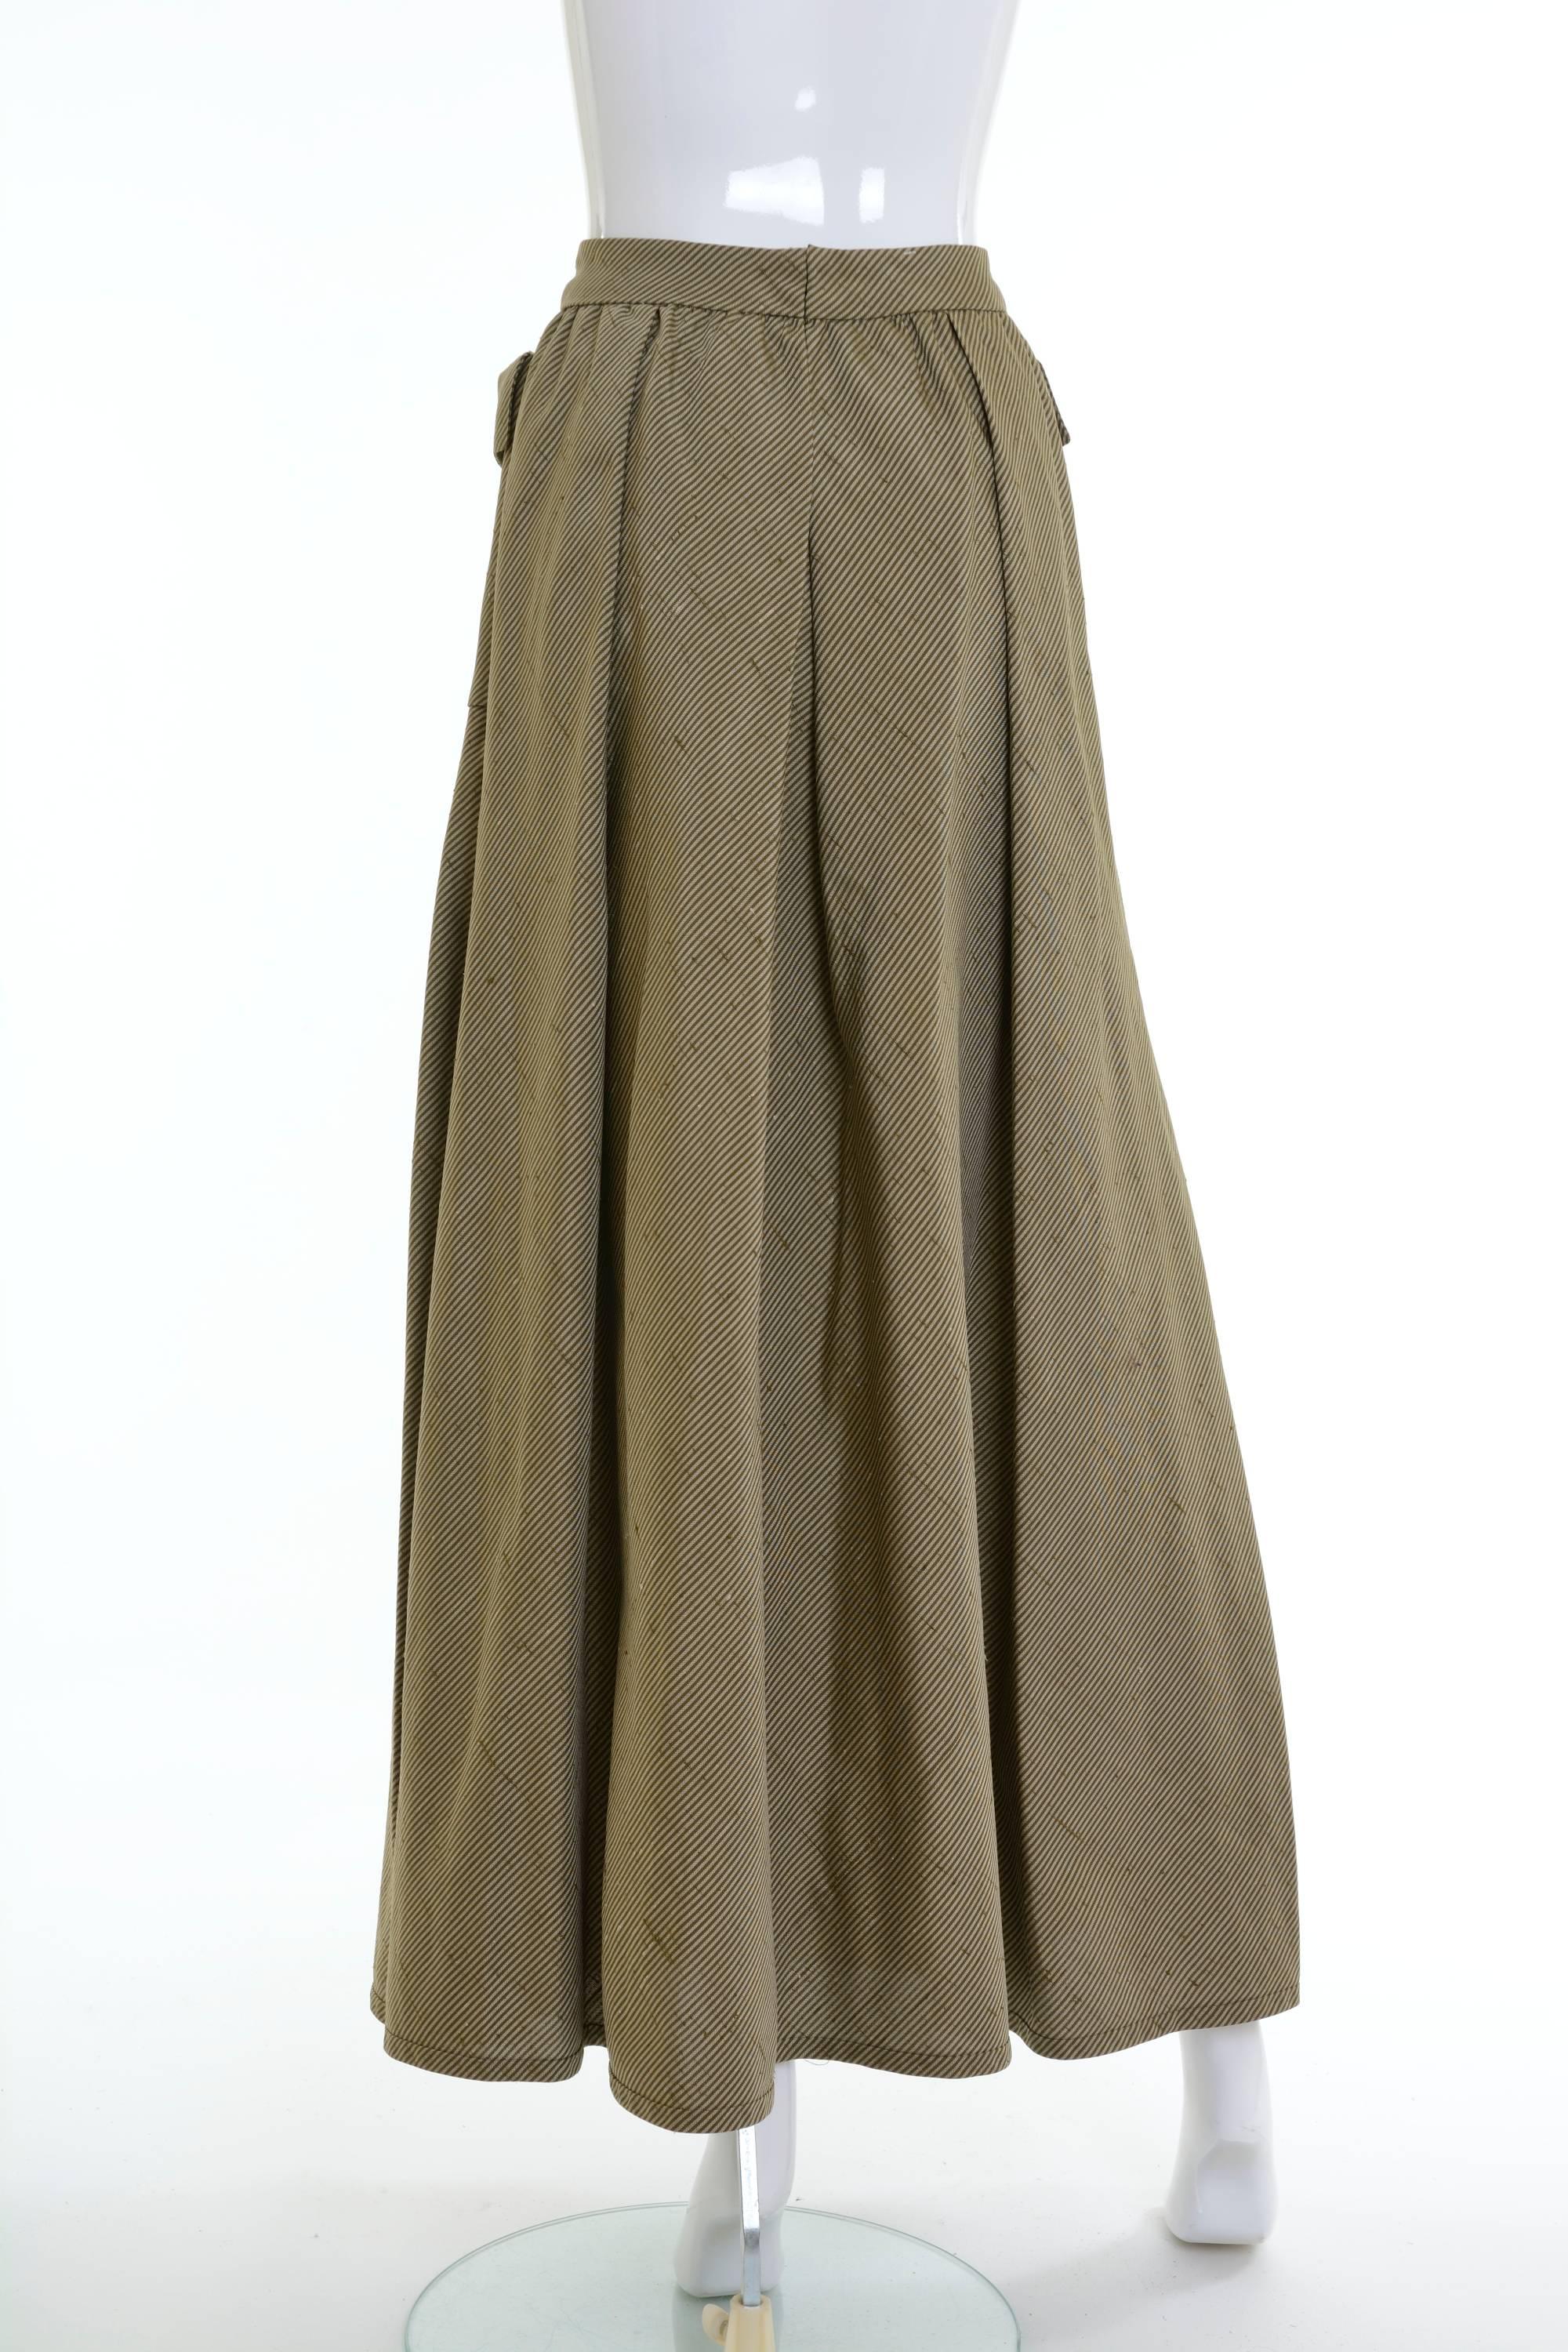 Women's 1980s Mila Schön Olive Green Long Skirt and Cape For Sale